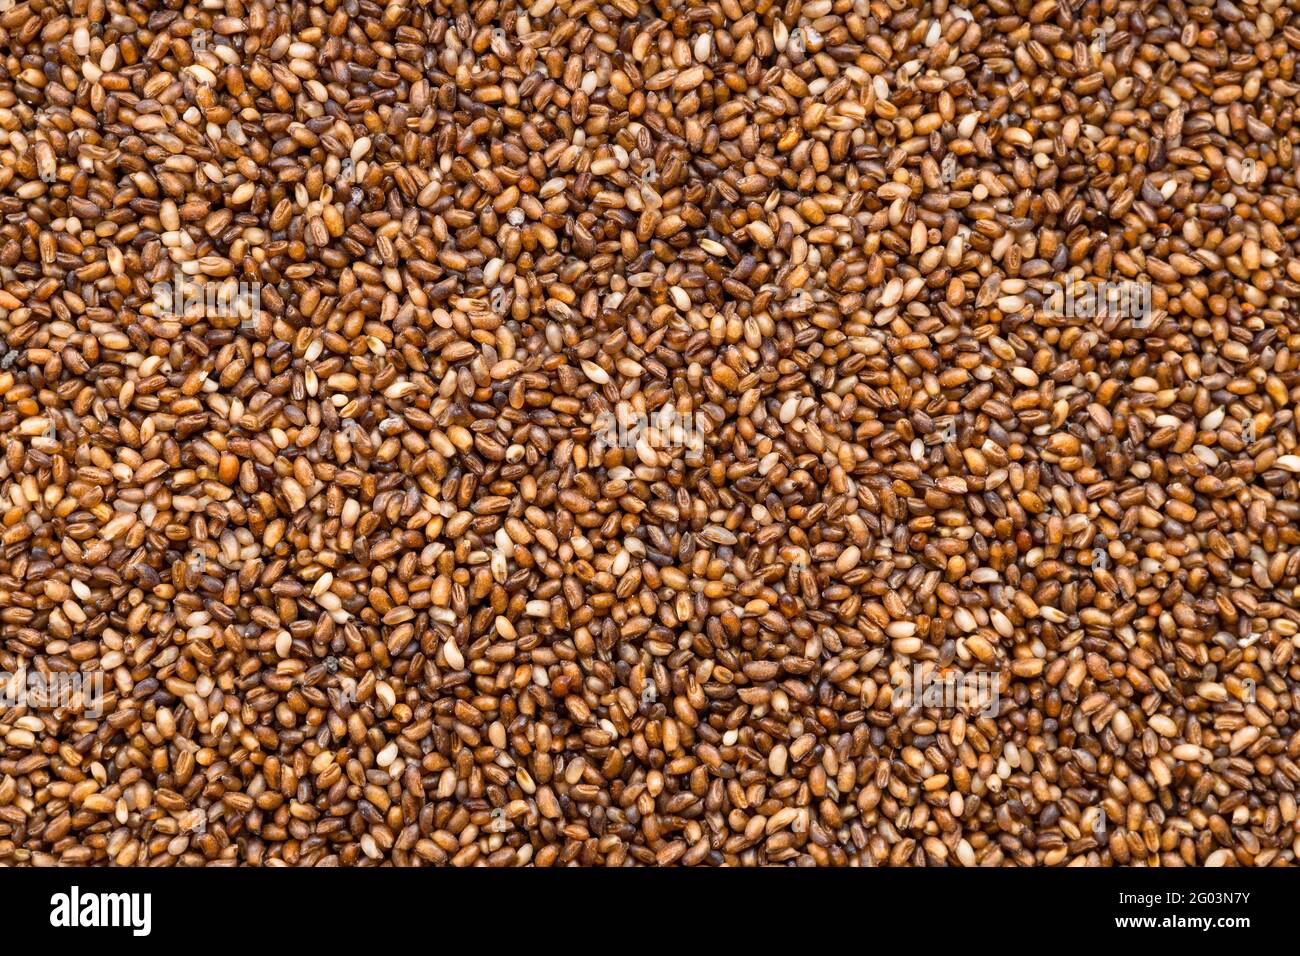 food background - whole-grain teff seeds close up Stock Photo